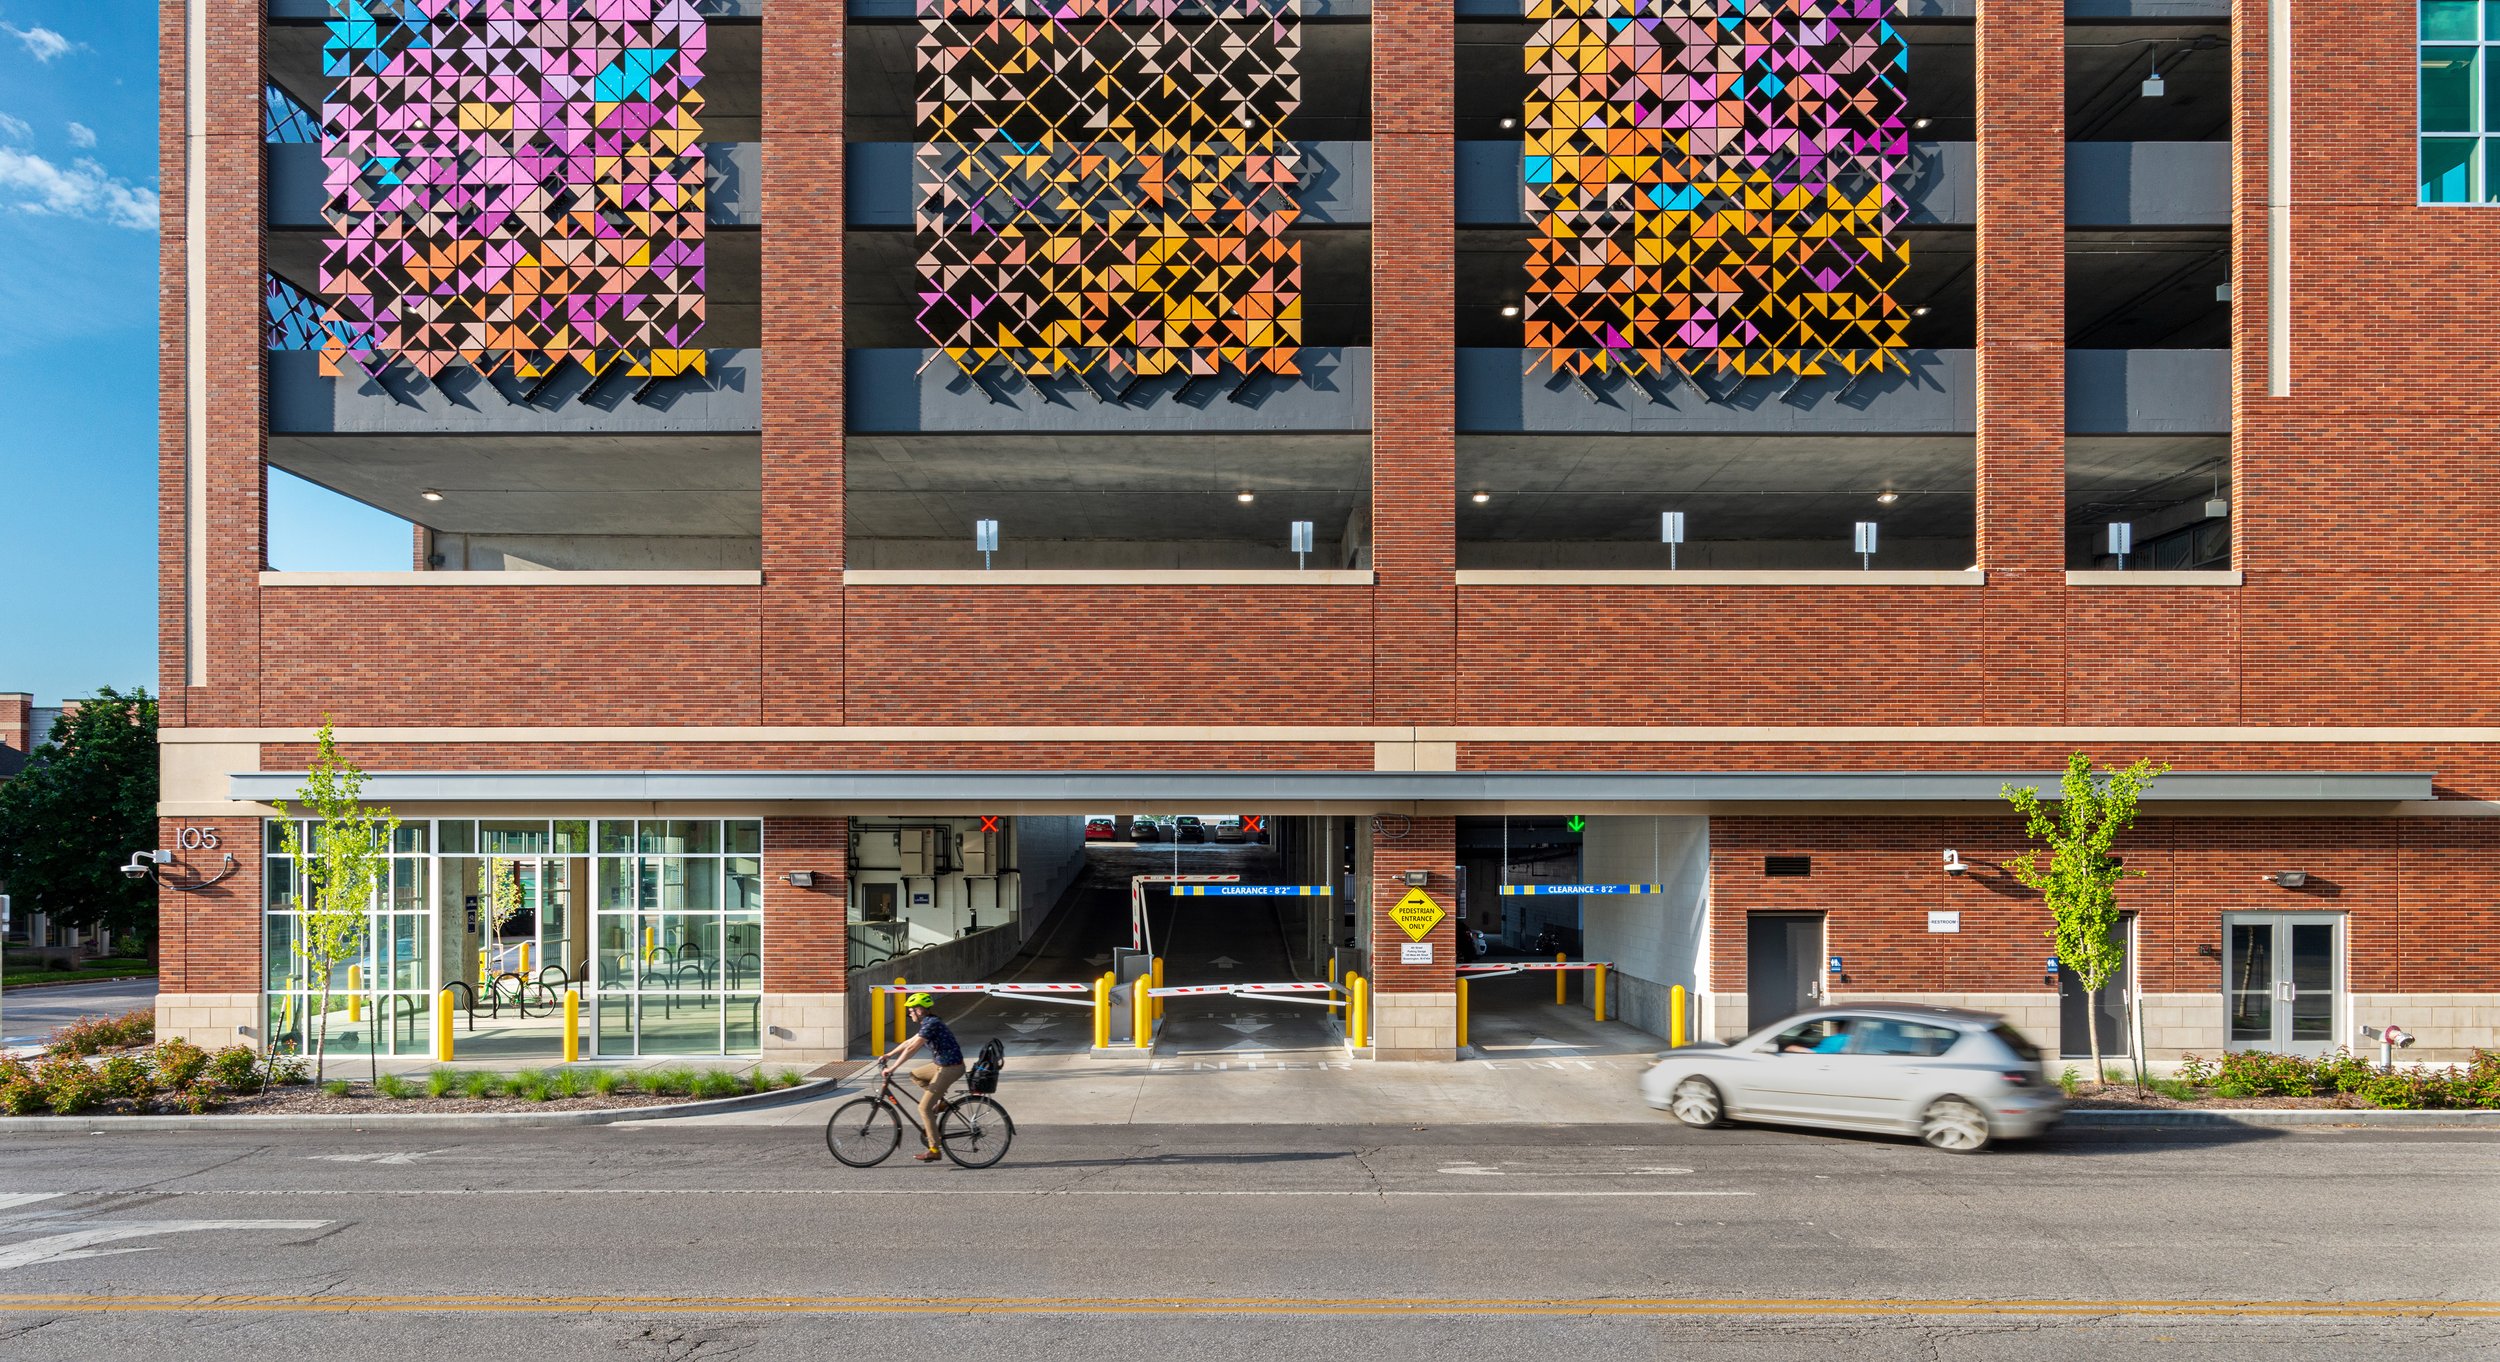 An architectural photography of a communal parking garage.